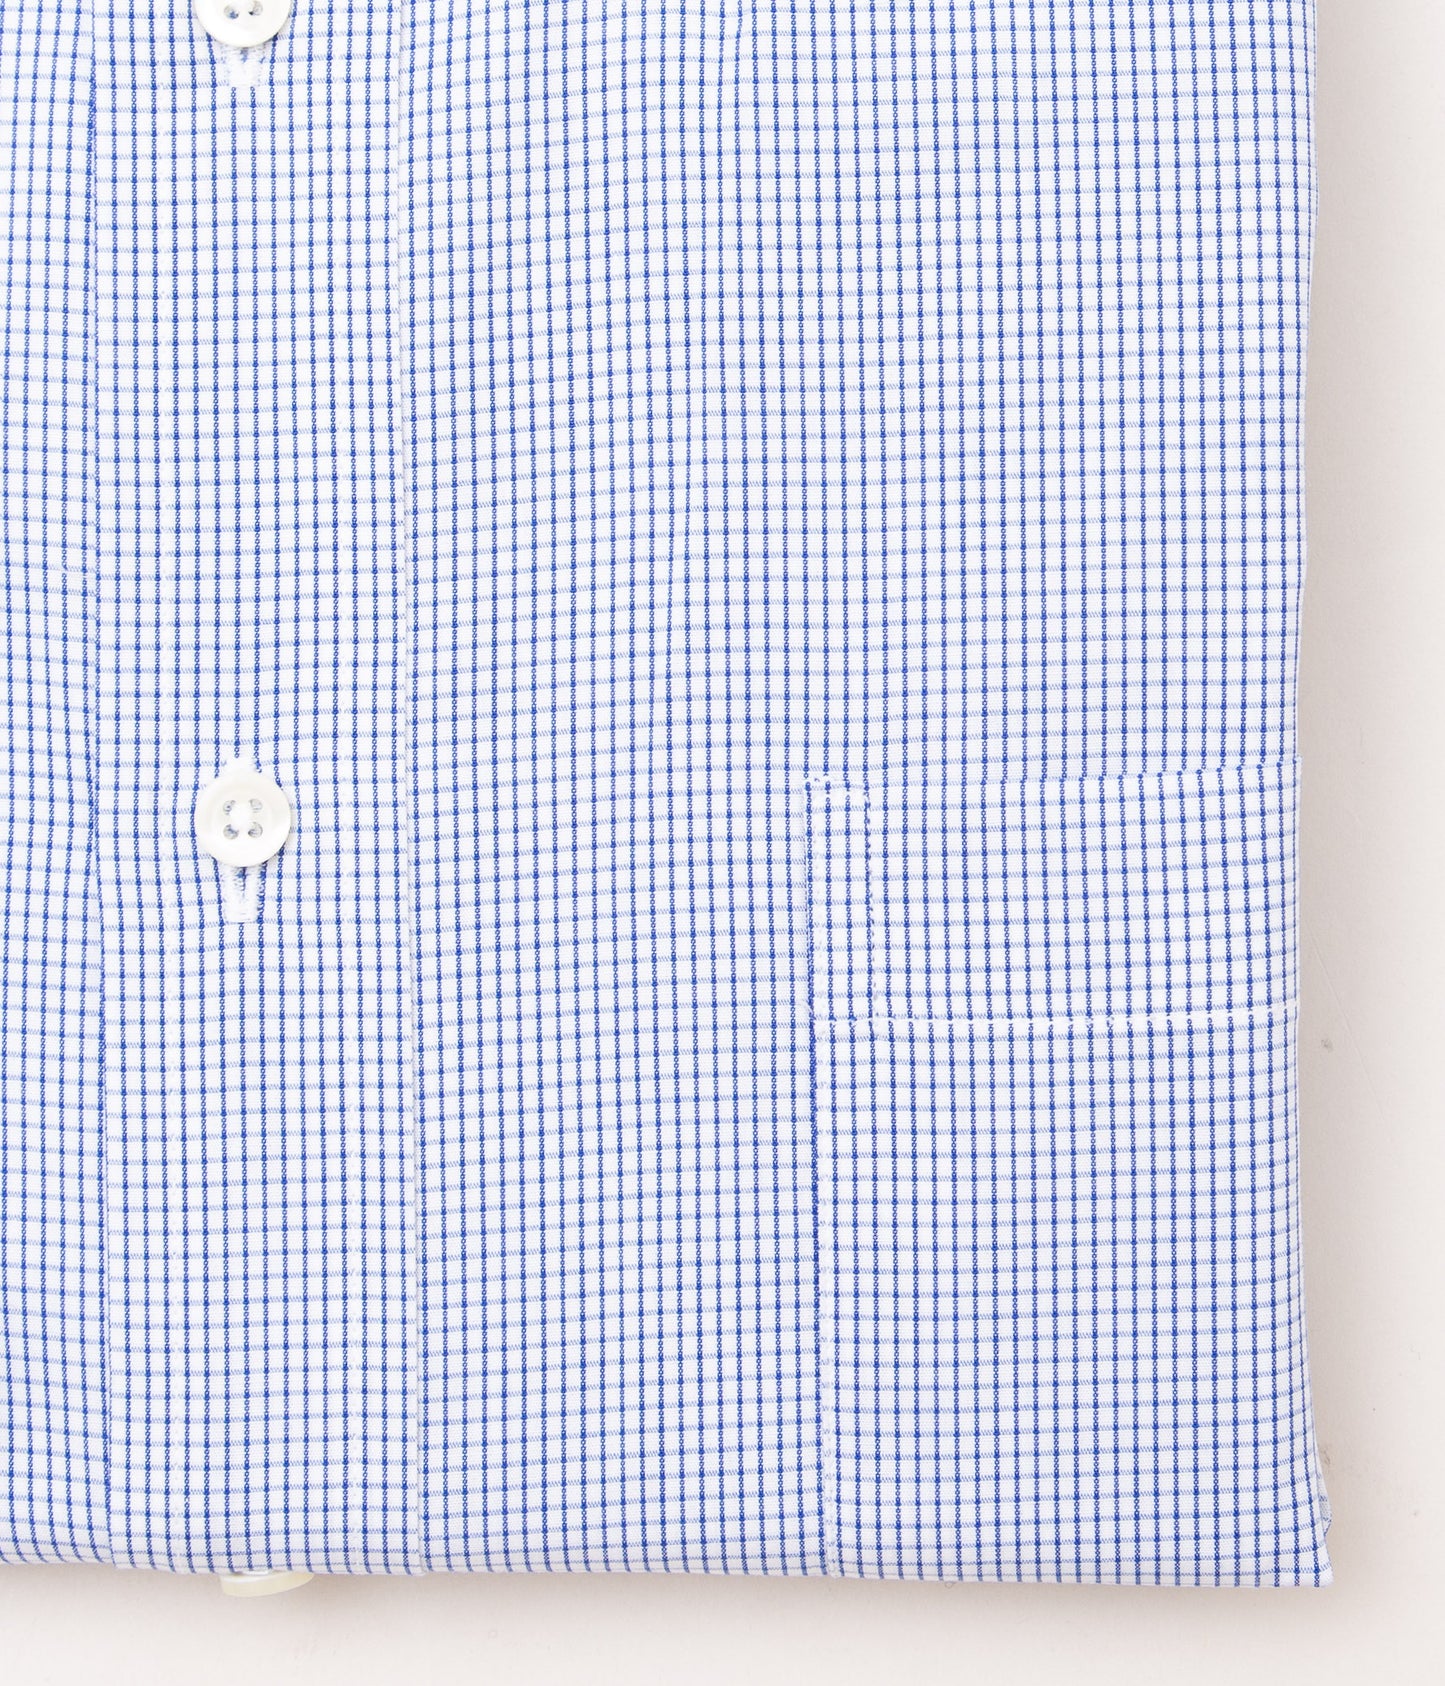 INDIVIDUALIZED SHIRTS "CLASSIC TINY CHECK (CLASSIC FIT BUTTON DOWN SHIRT)" (BLUE)